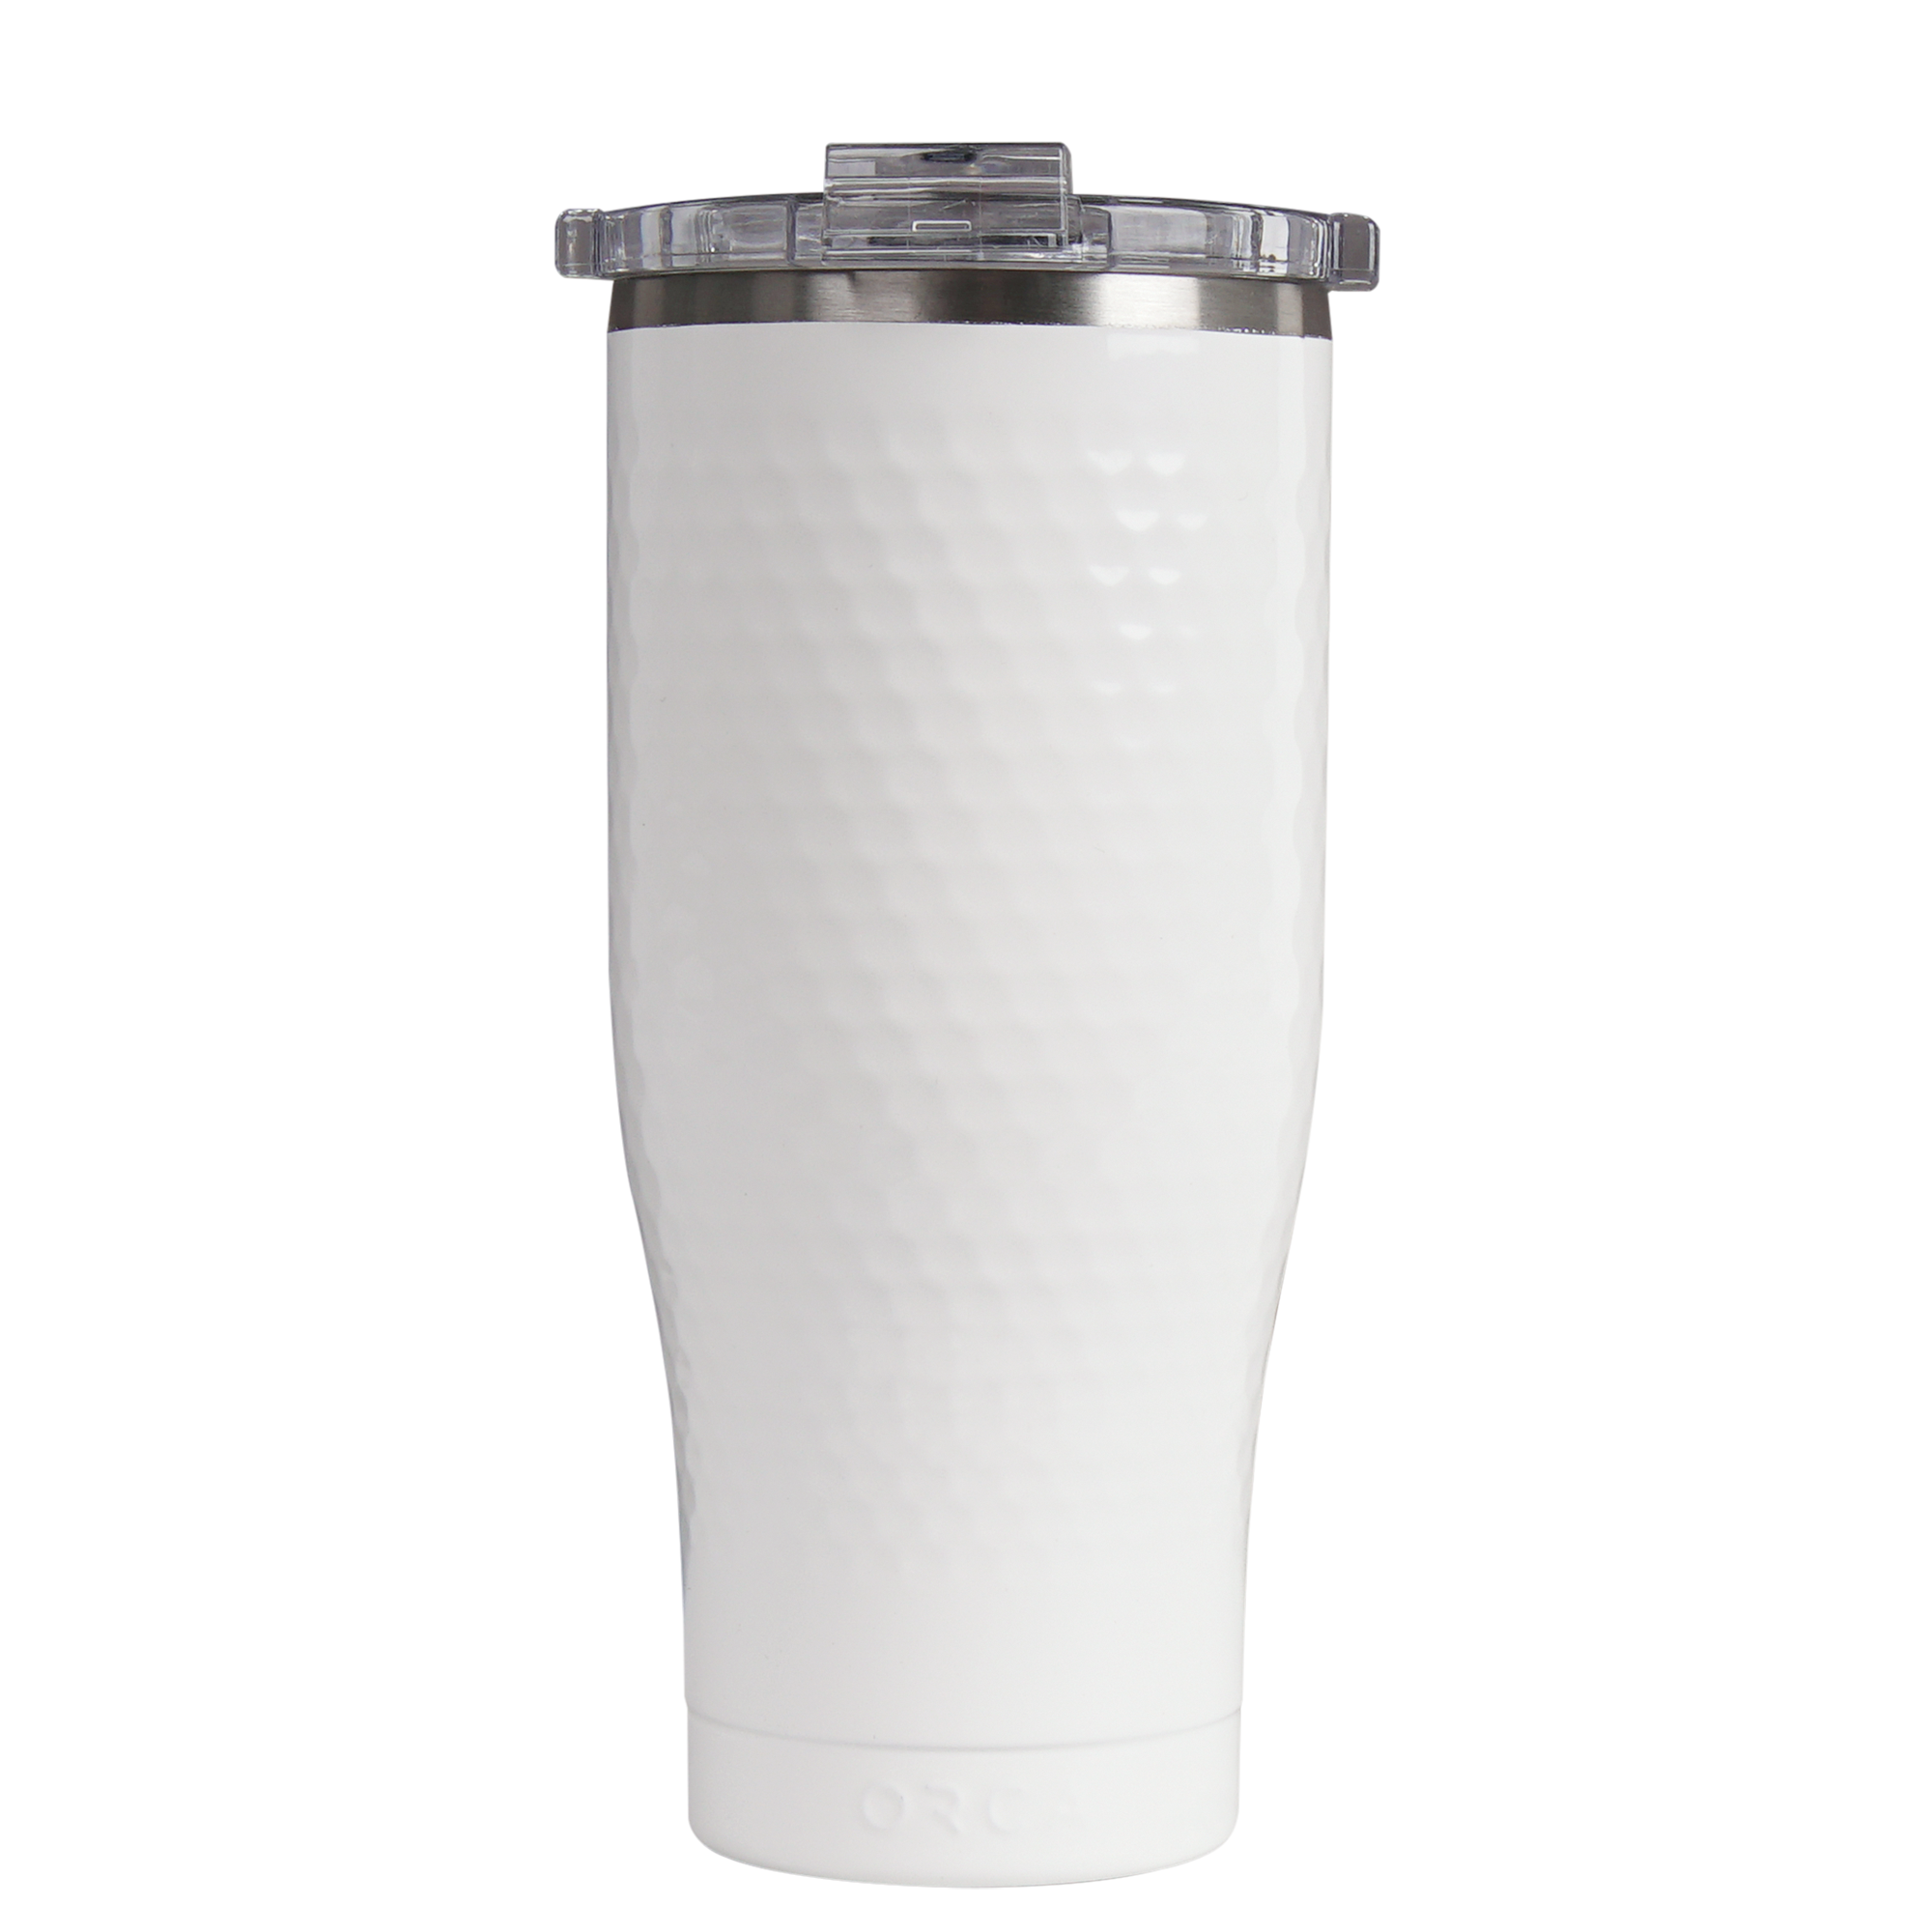 Orca Pearl Chaser 27oz